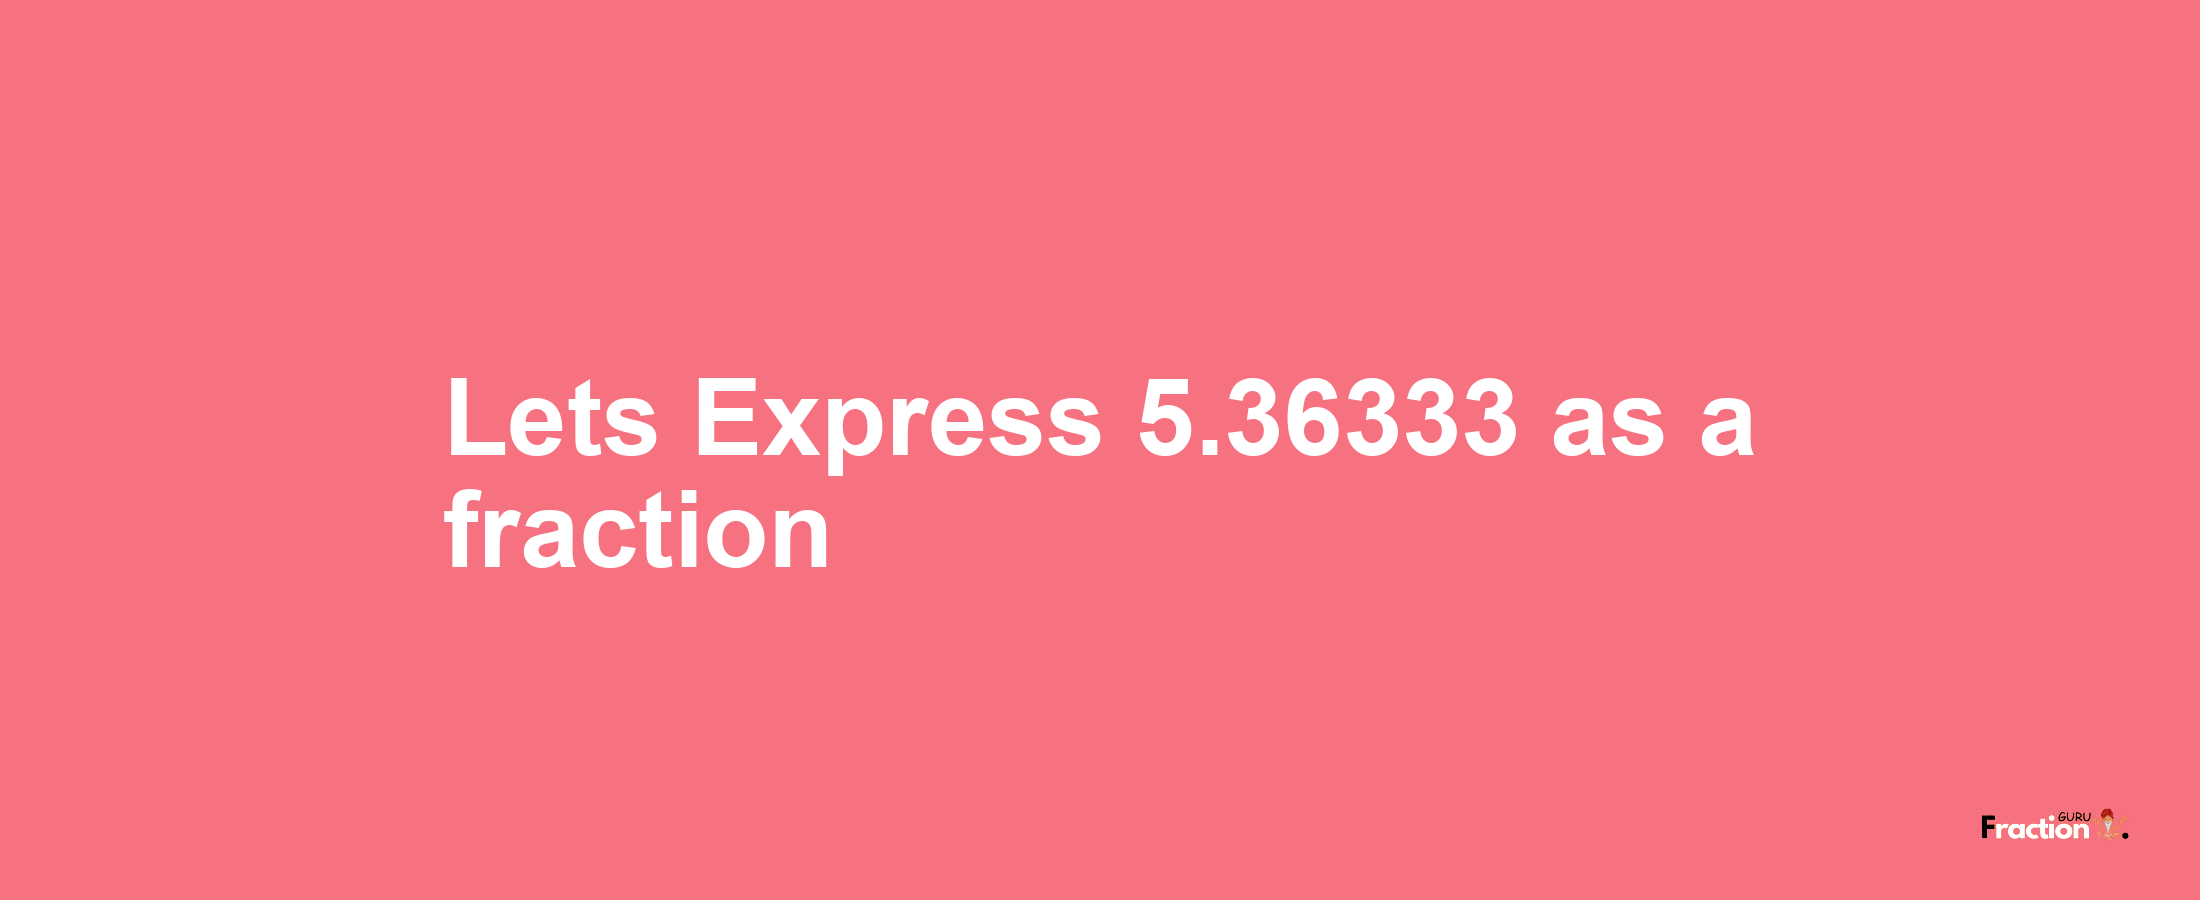 Lets Express 5.36333 as afraction